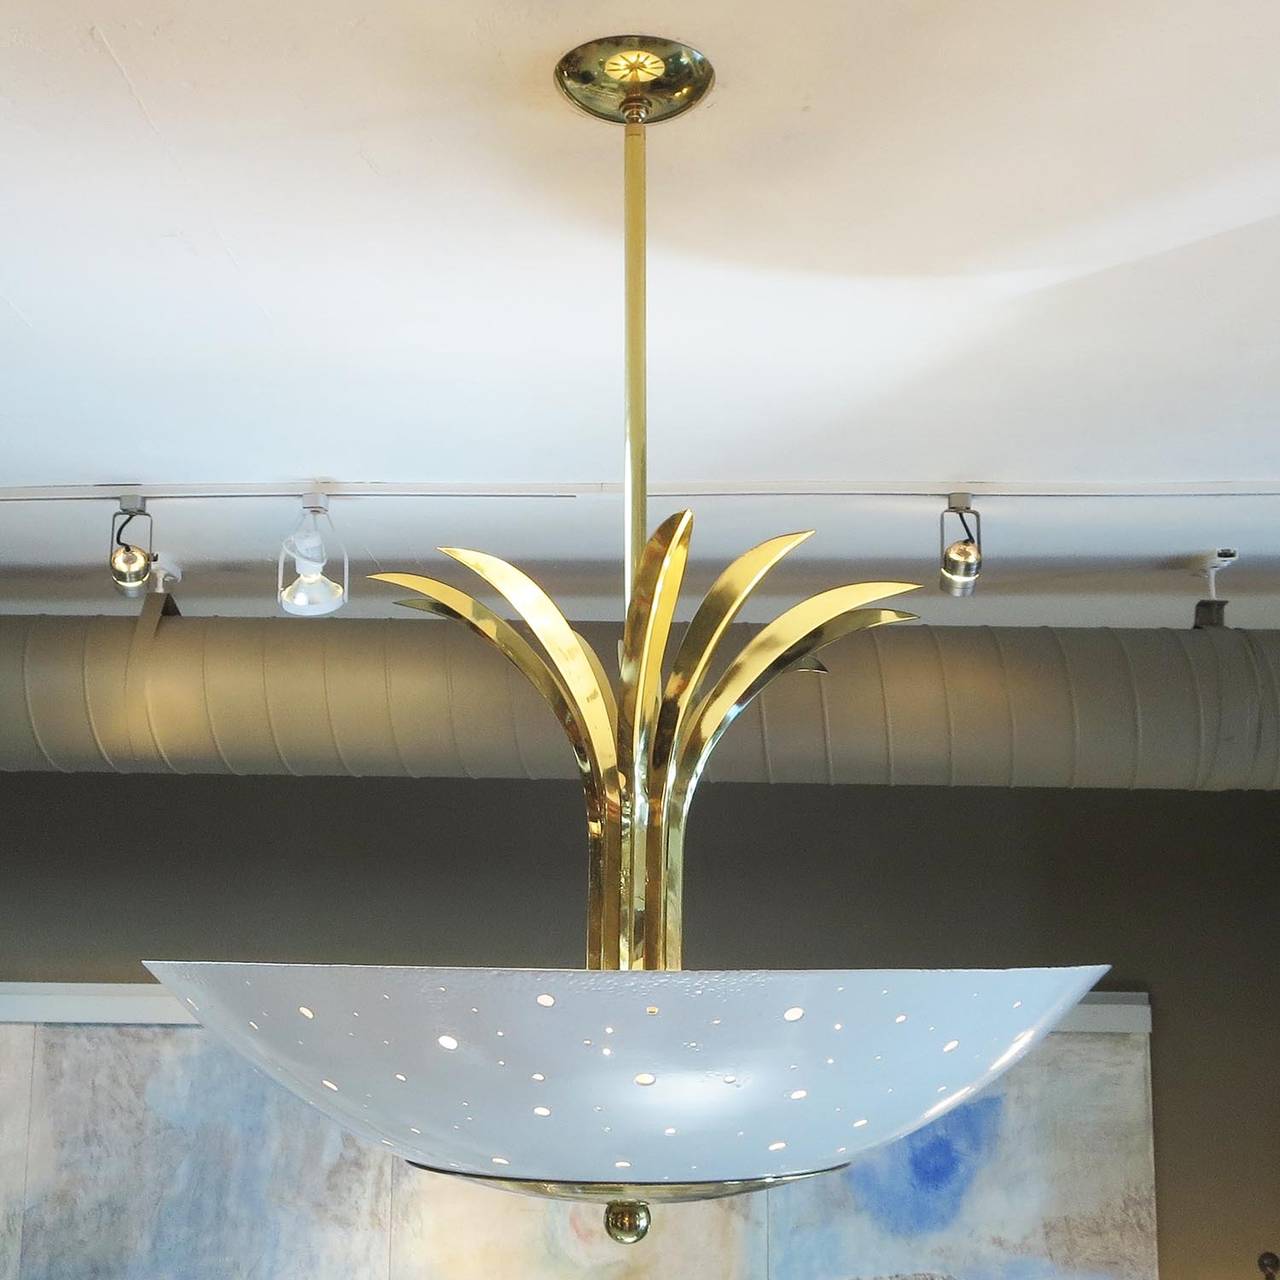 This superbly stylish chandelier has been restored, including all new sockets and wiring. All brass elements have been re-plated, and the perforated bowl shades have been powder coated in a lovely cream gloss finish. There are some minor areas of